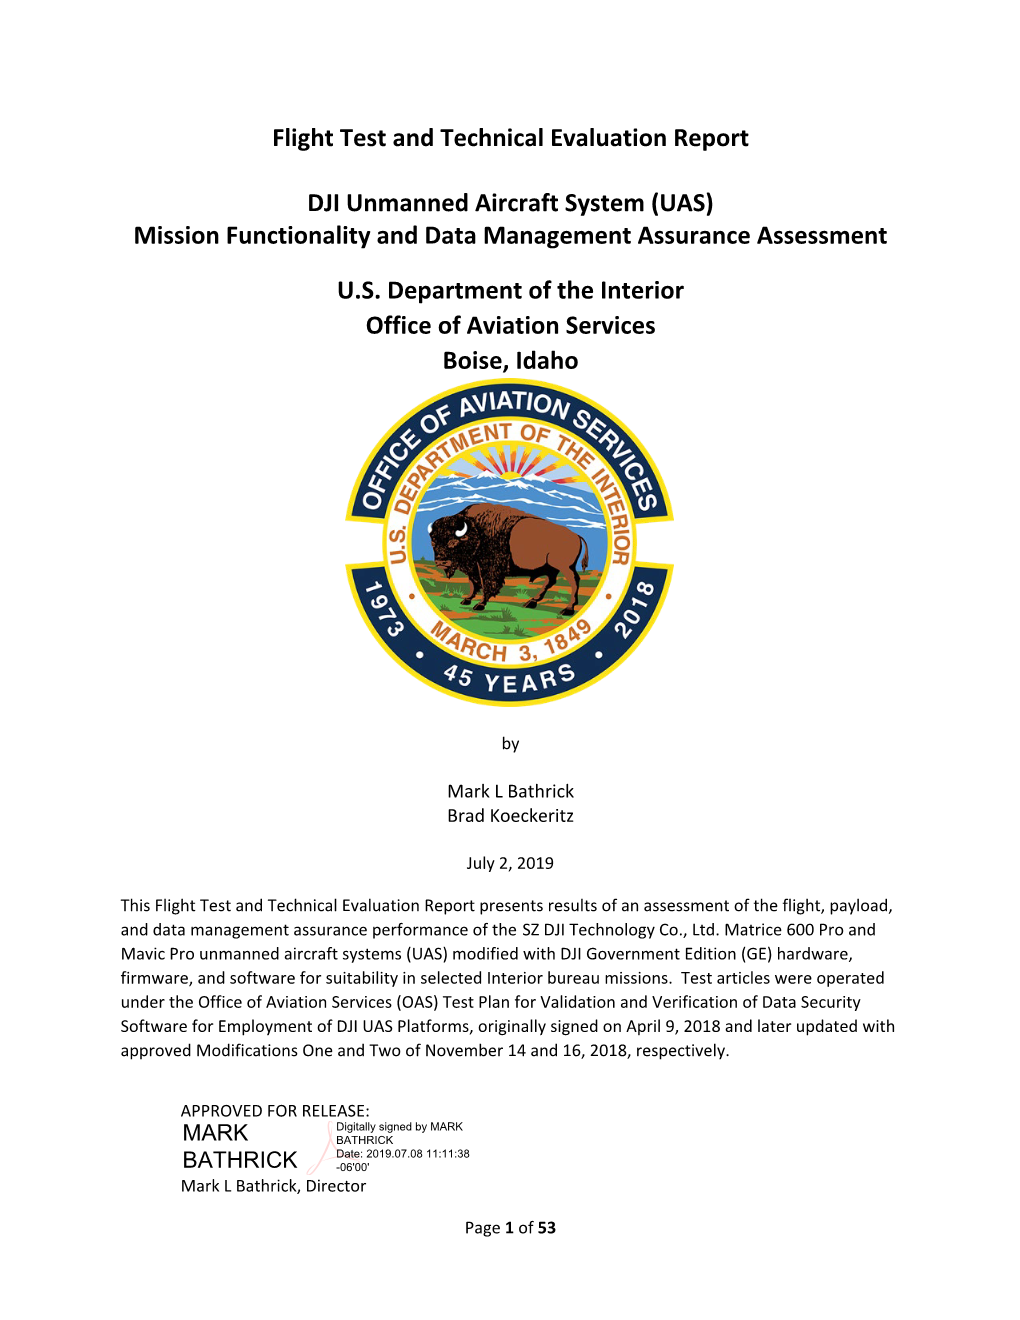 DJI Government Edition UAS Data Management Assurance Flight Test and Evaluation Report